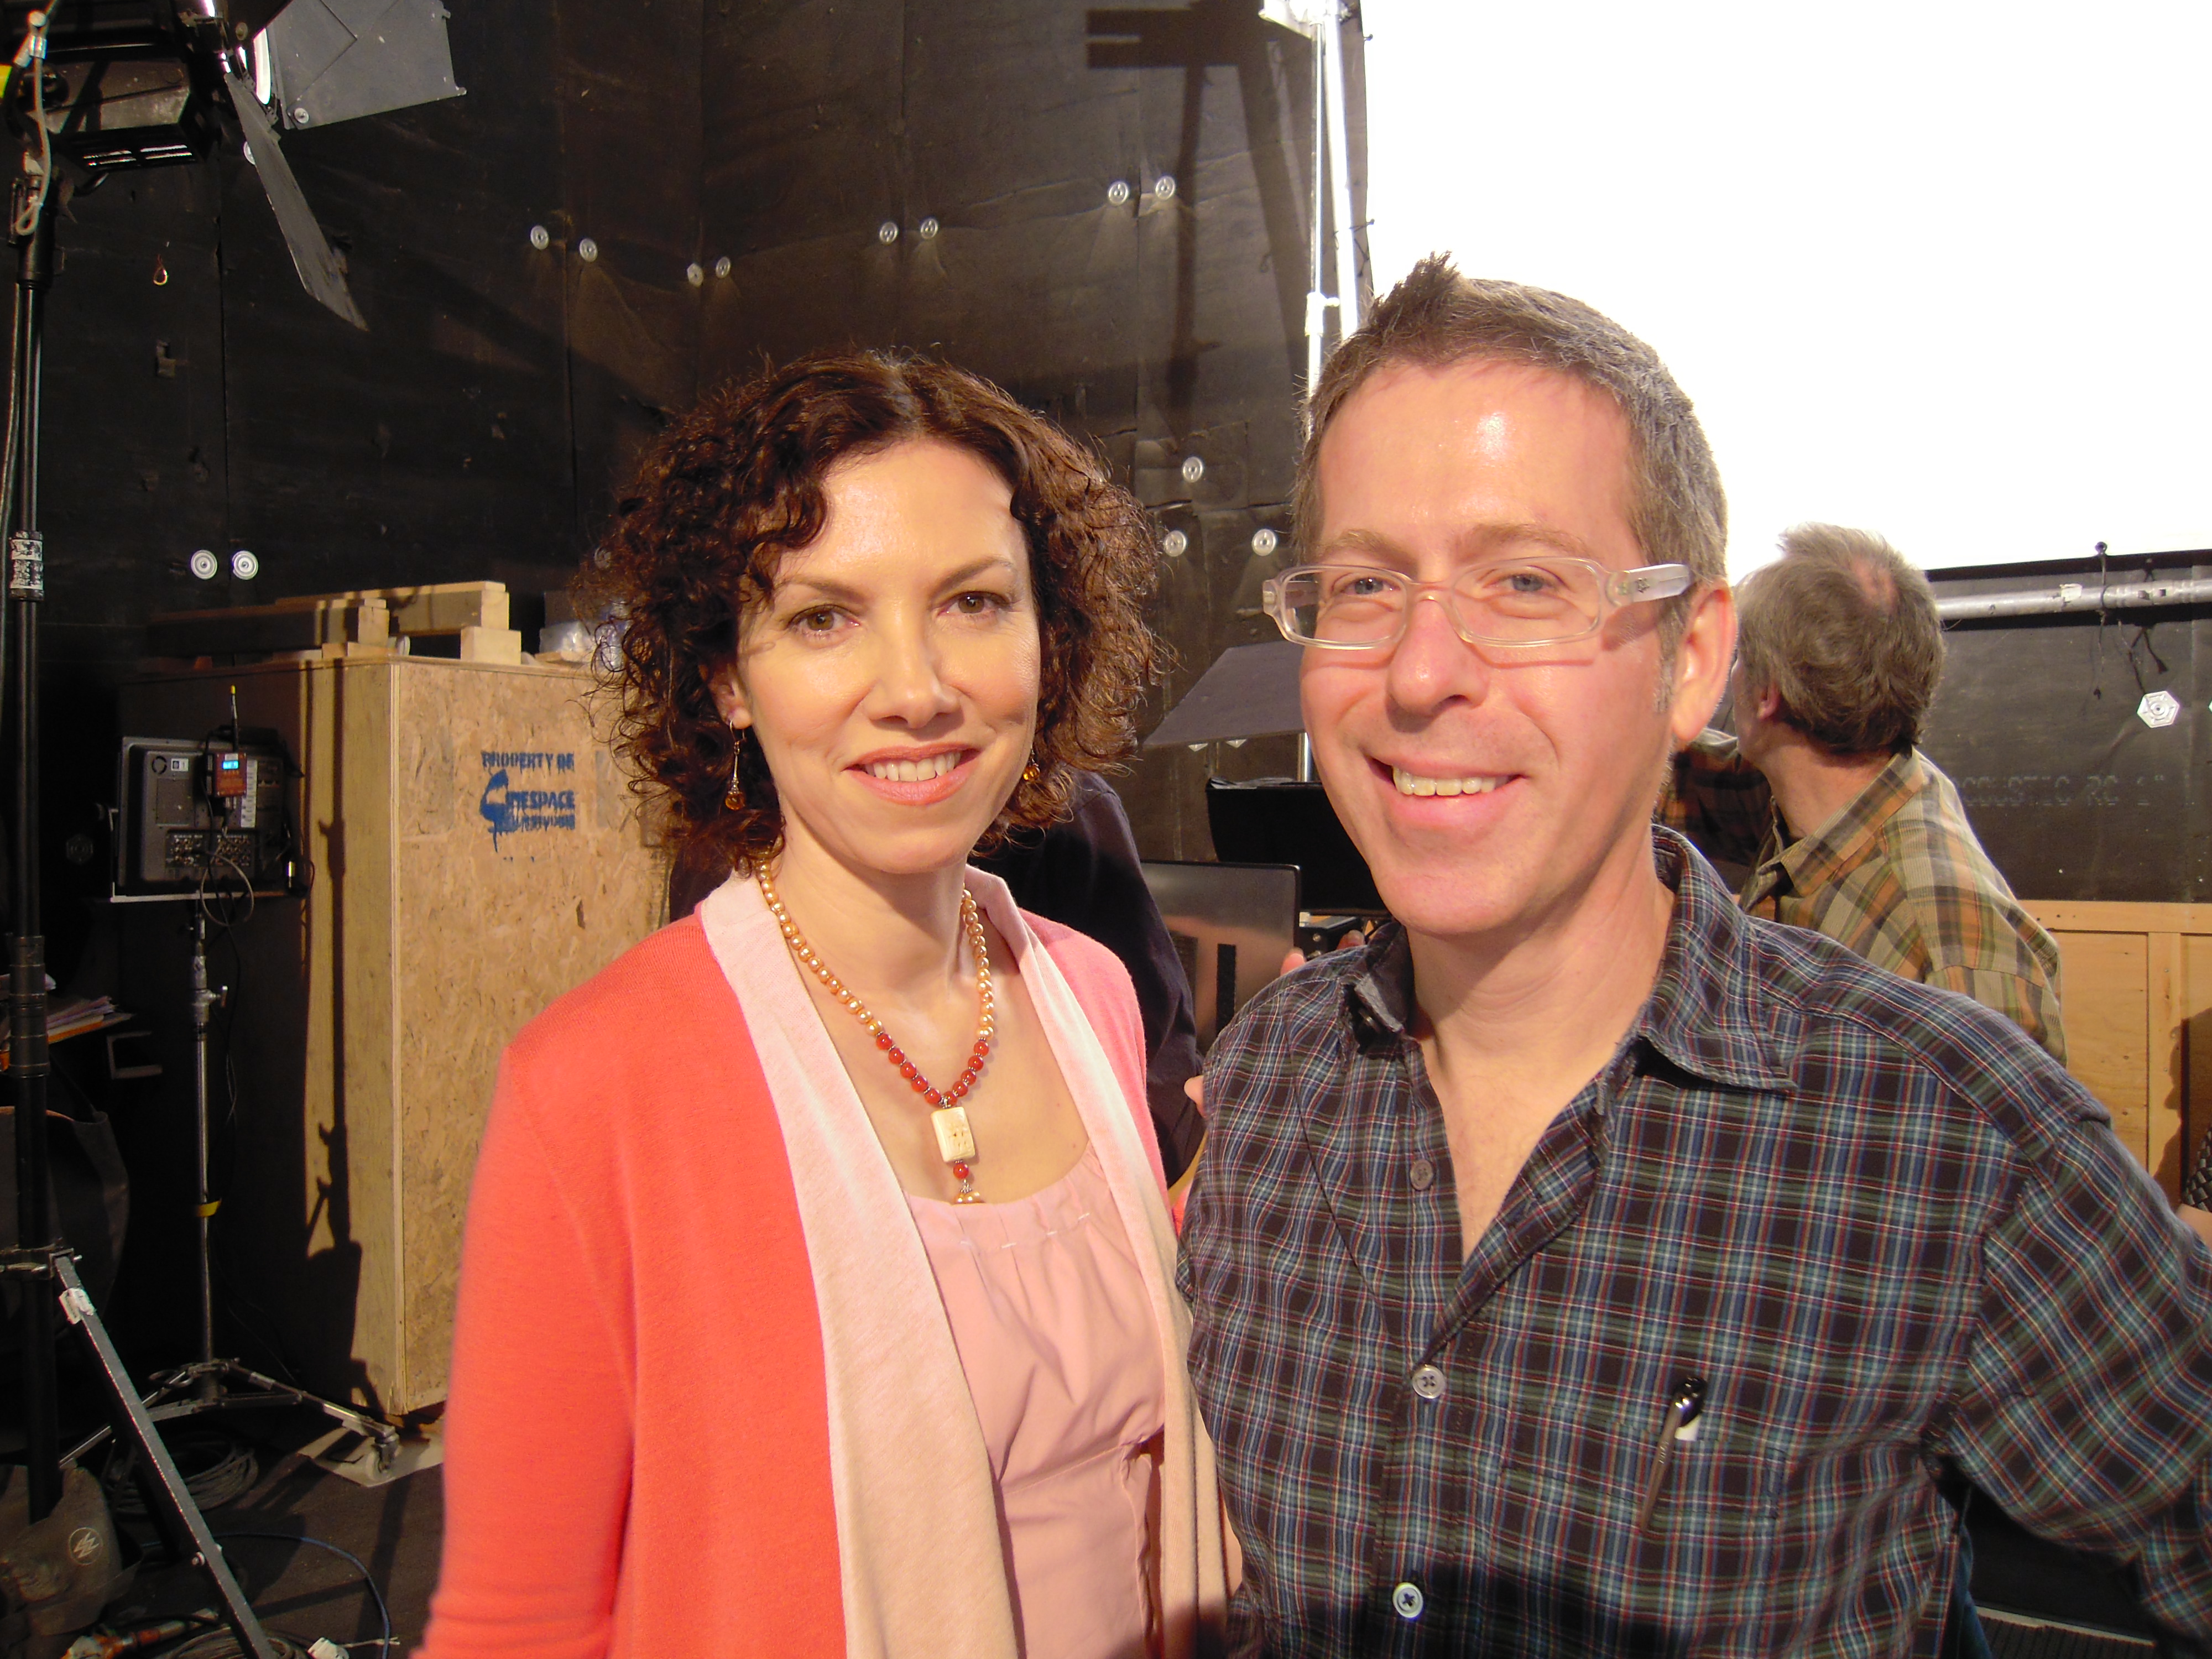 Elizabeth Rowin and Kevin Greutert on the set of SAW 3D.